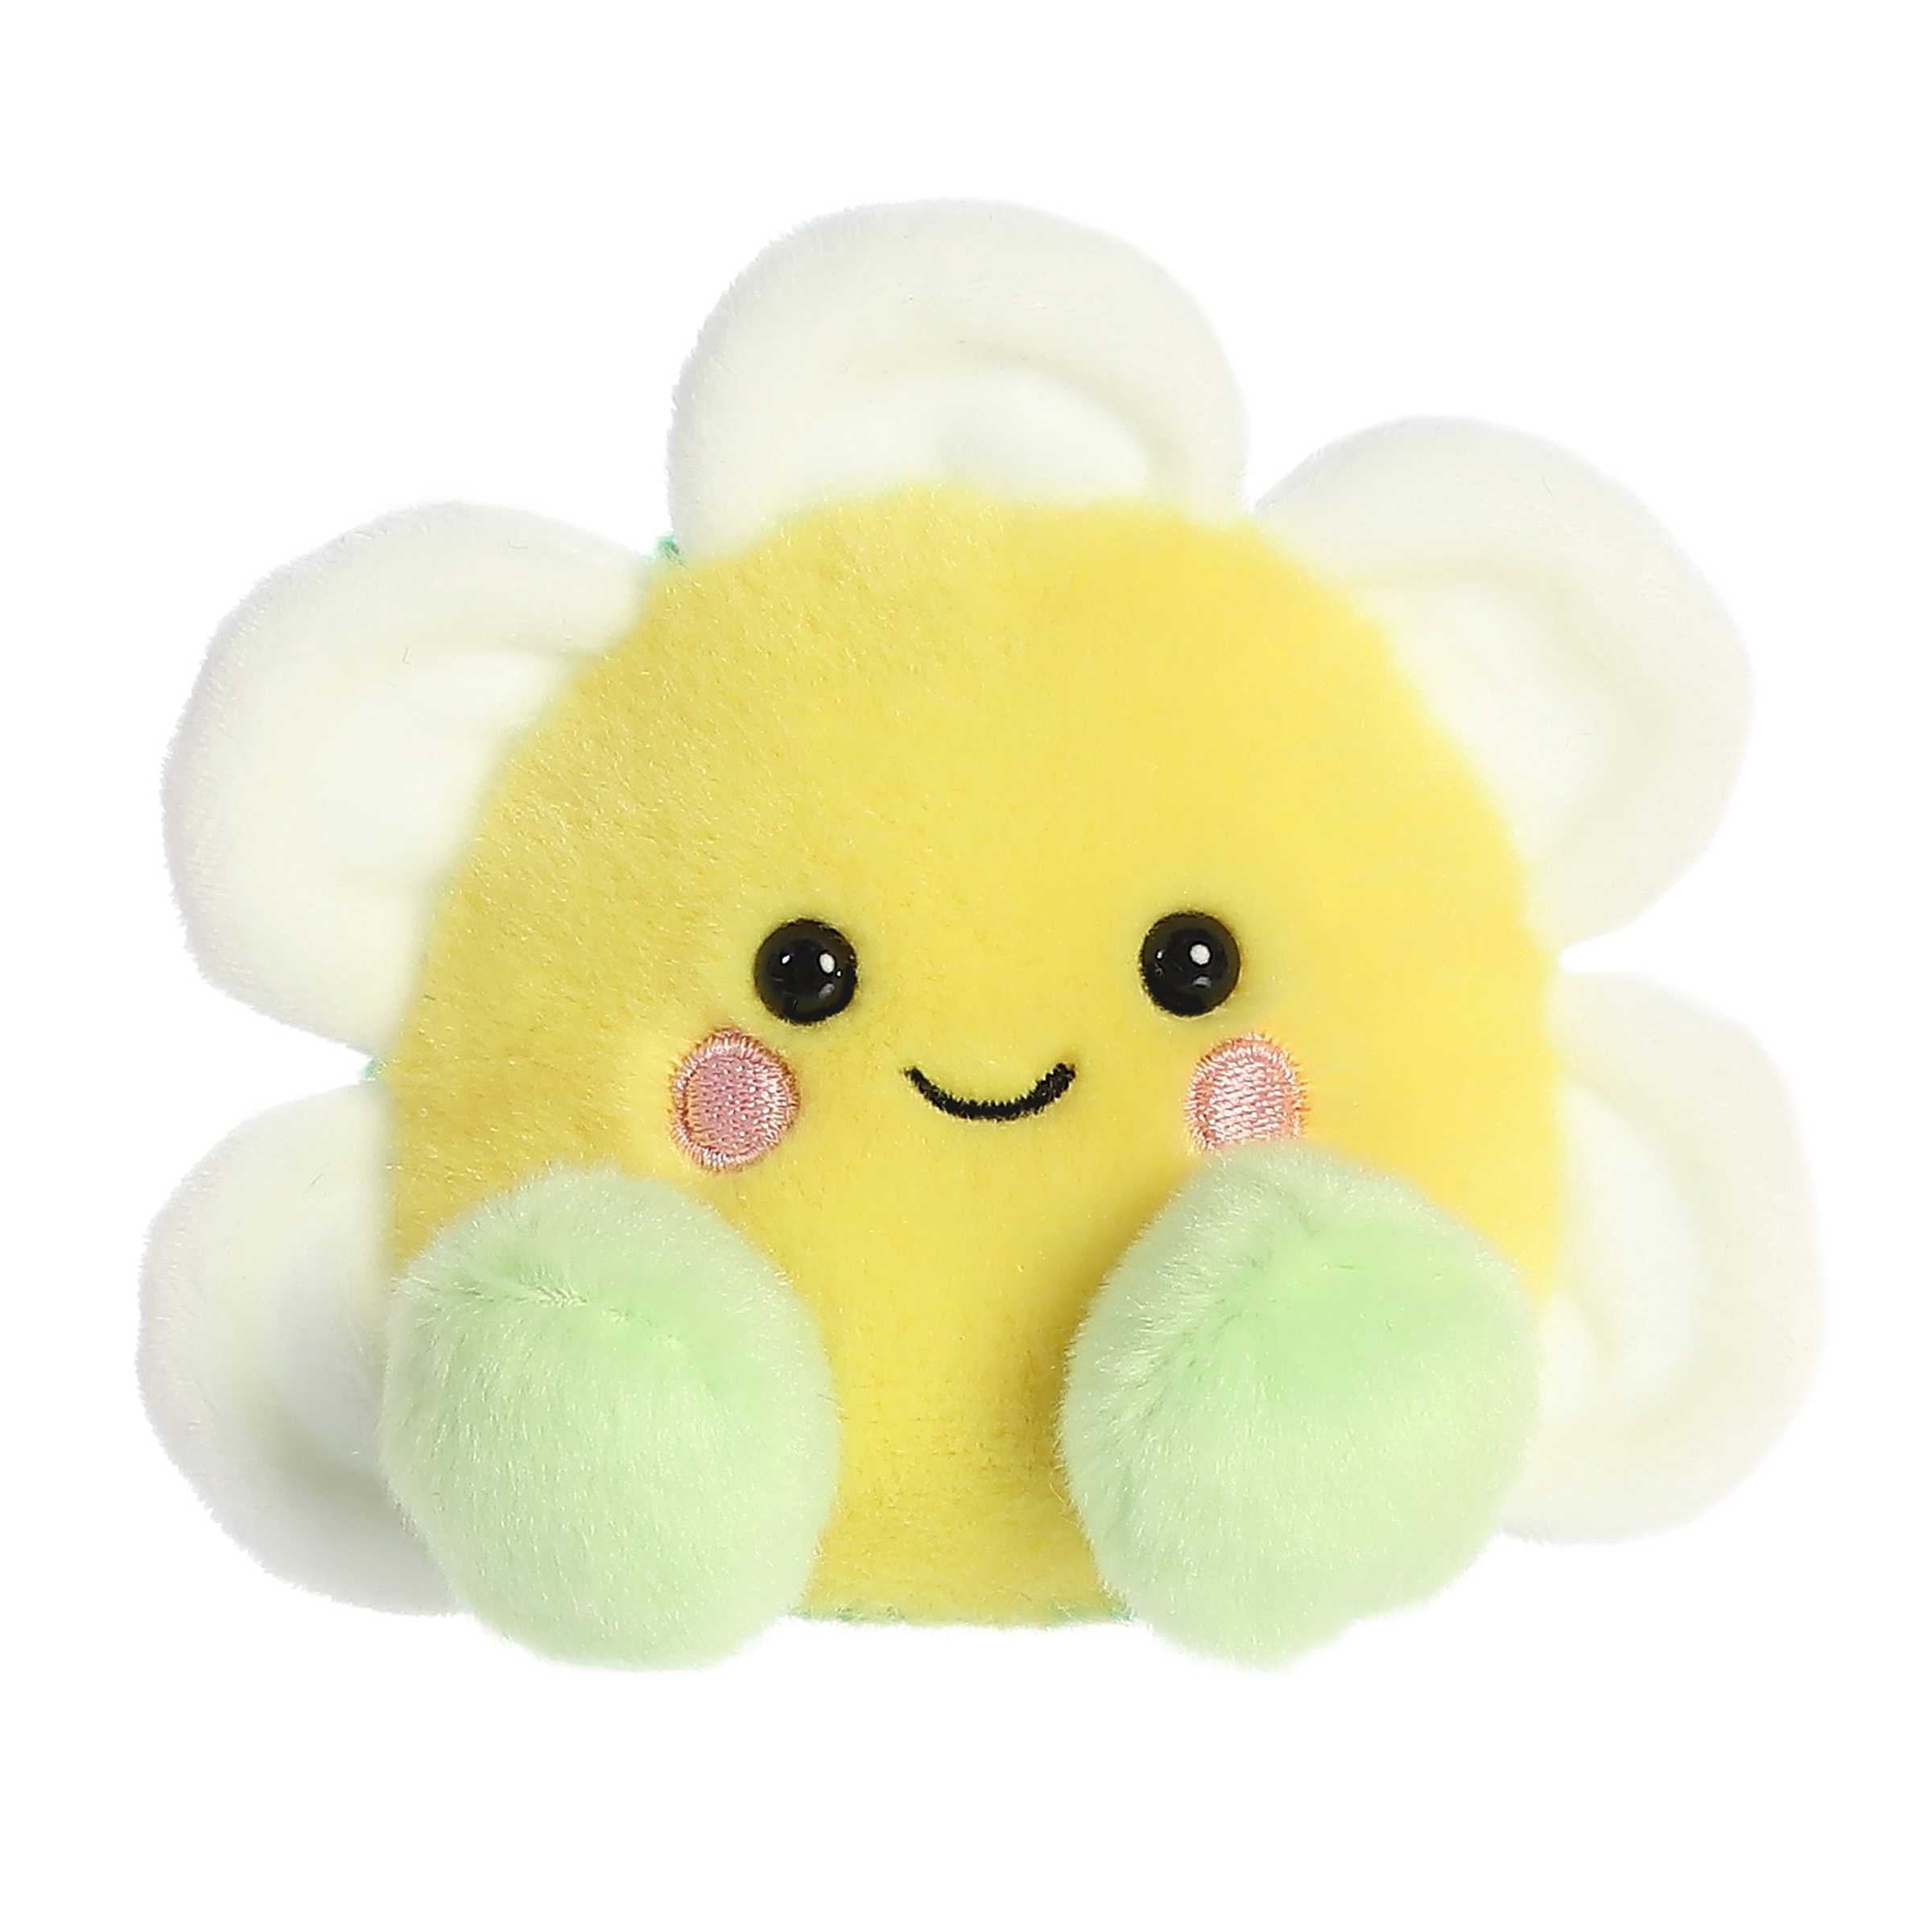 Deon Daisy from Palm Pals, a plush with soft petals and a cheerful face, bringing sunshine and nature’s elegance.